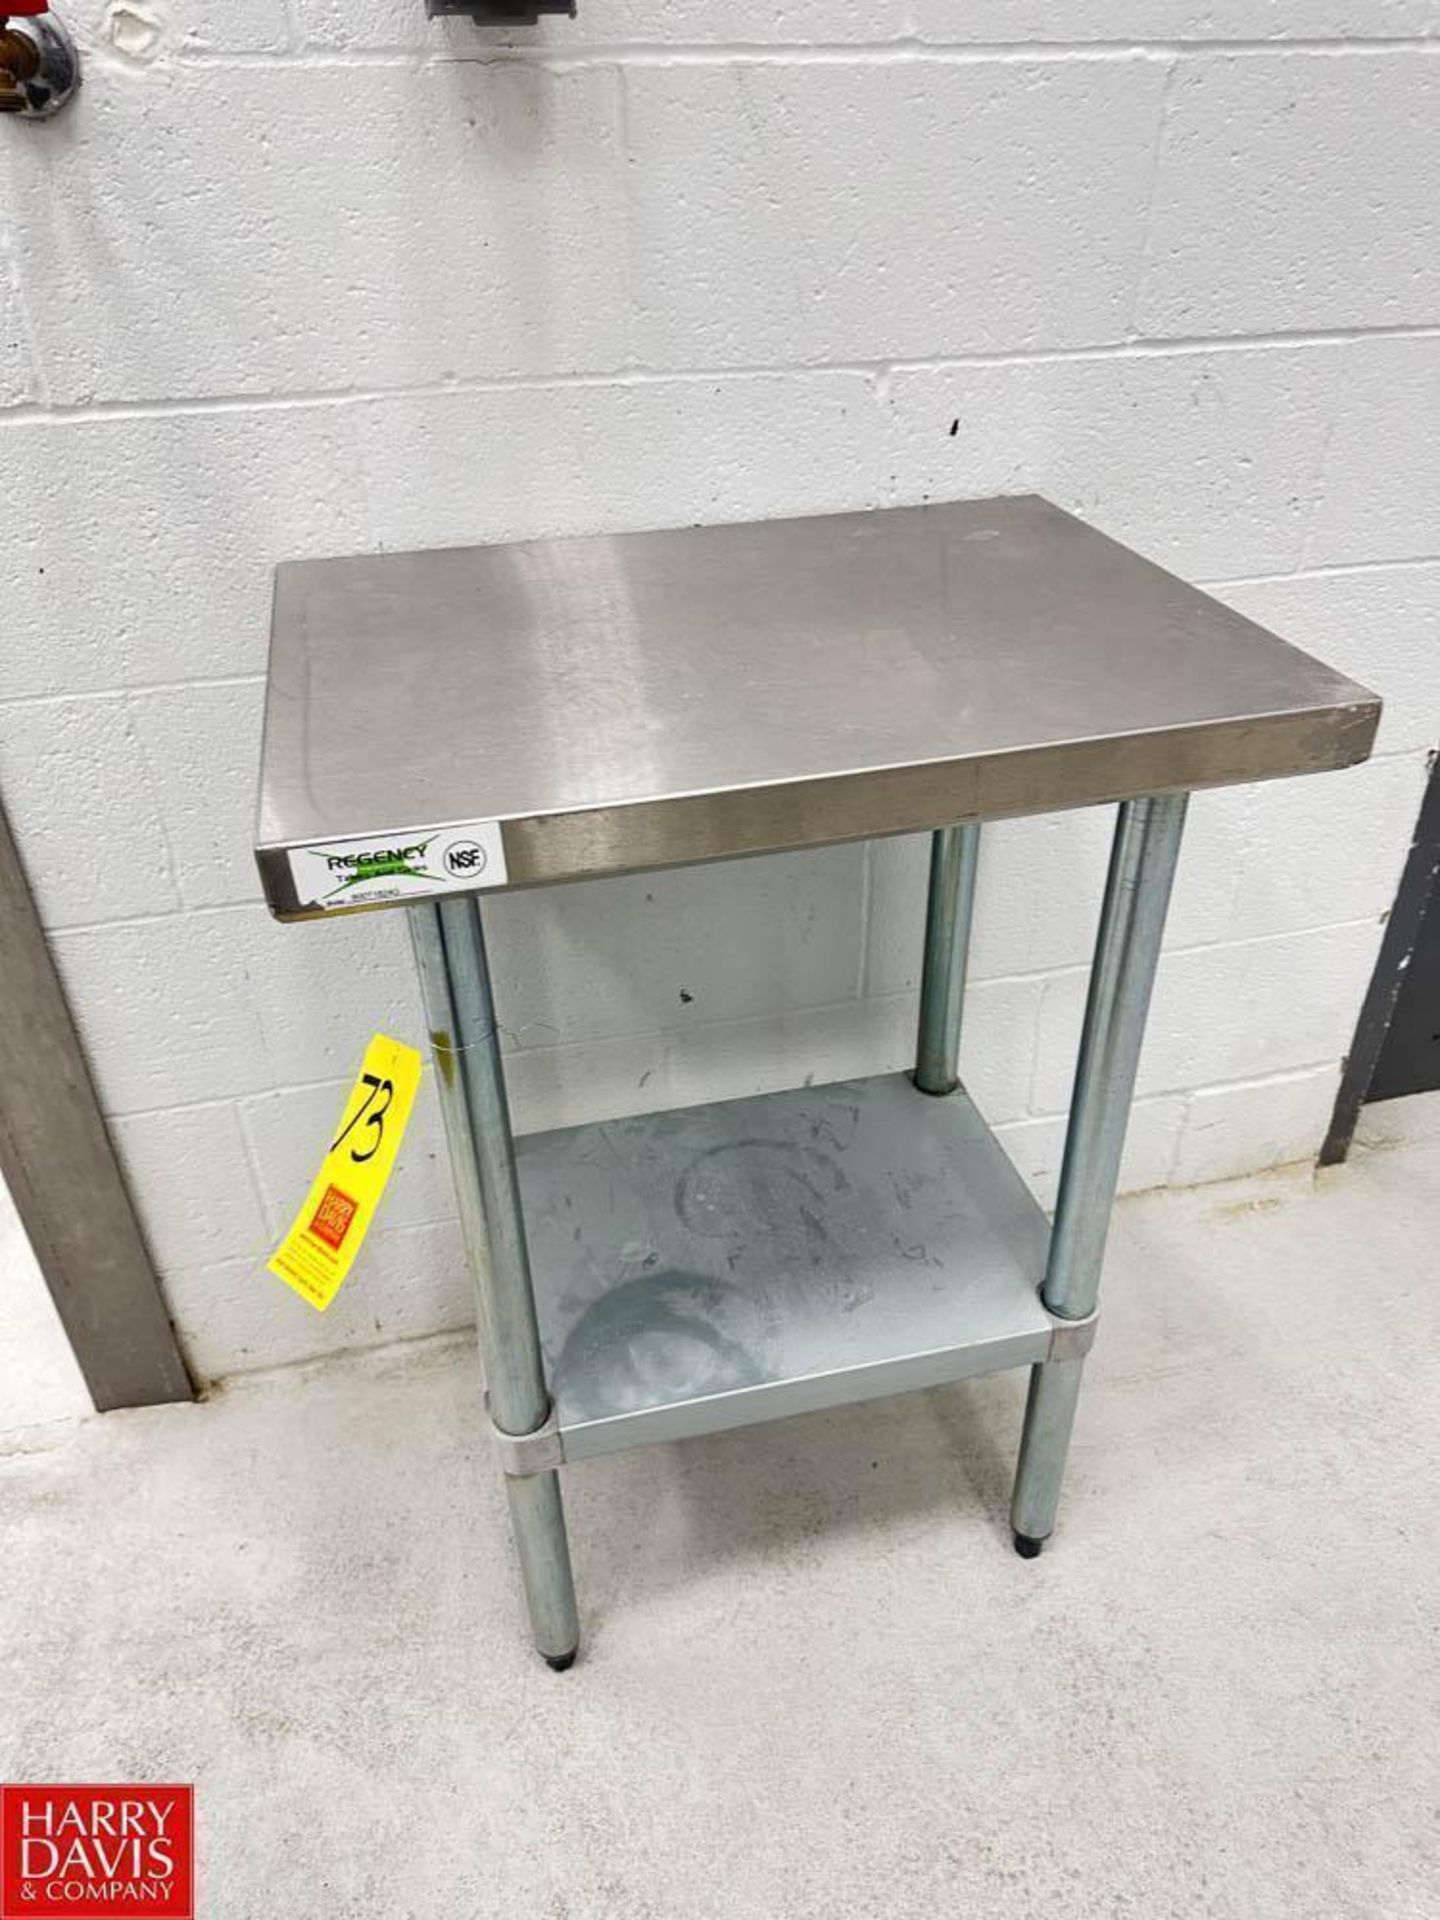 Regency S/S Work Table with Undershelf, Dimensions = 18" x 24" - Rigging Fee: $35 - Image 2 of 2